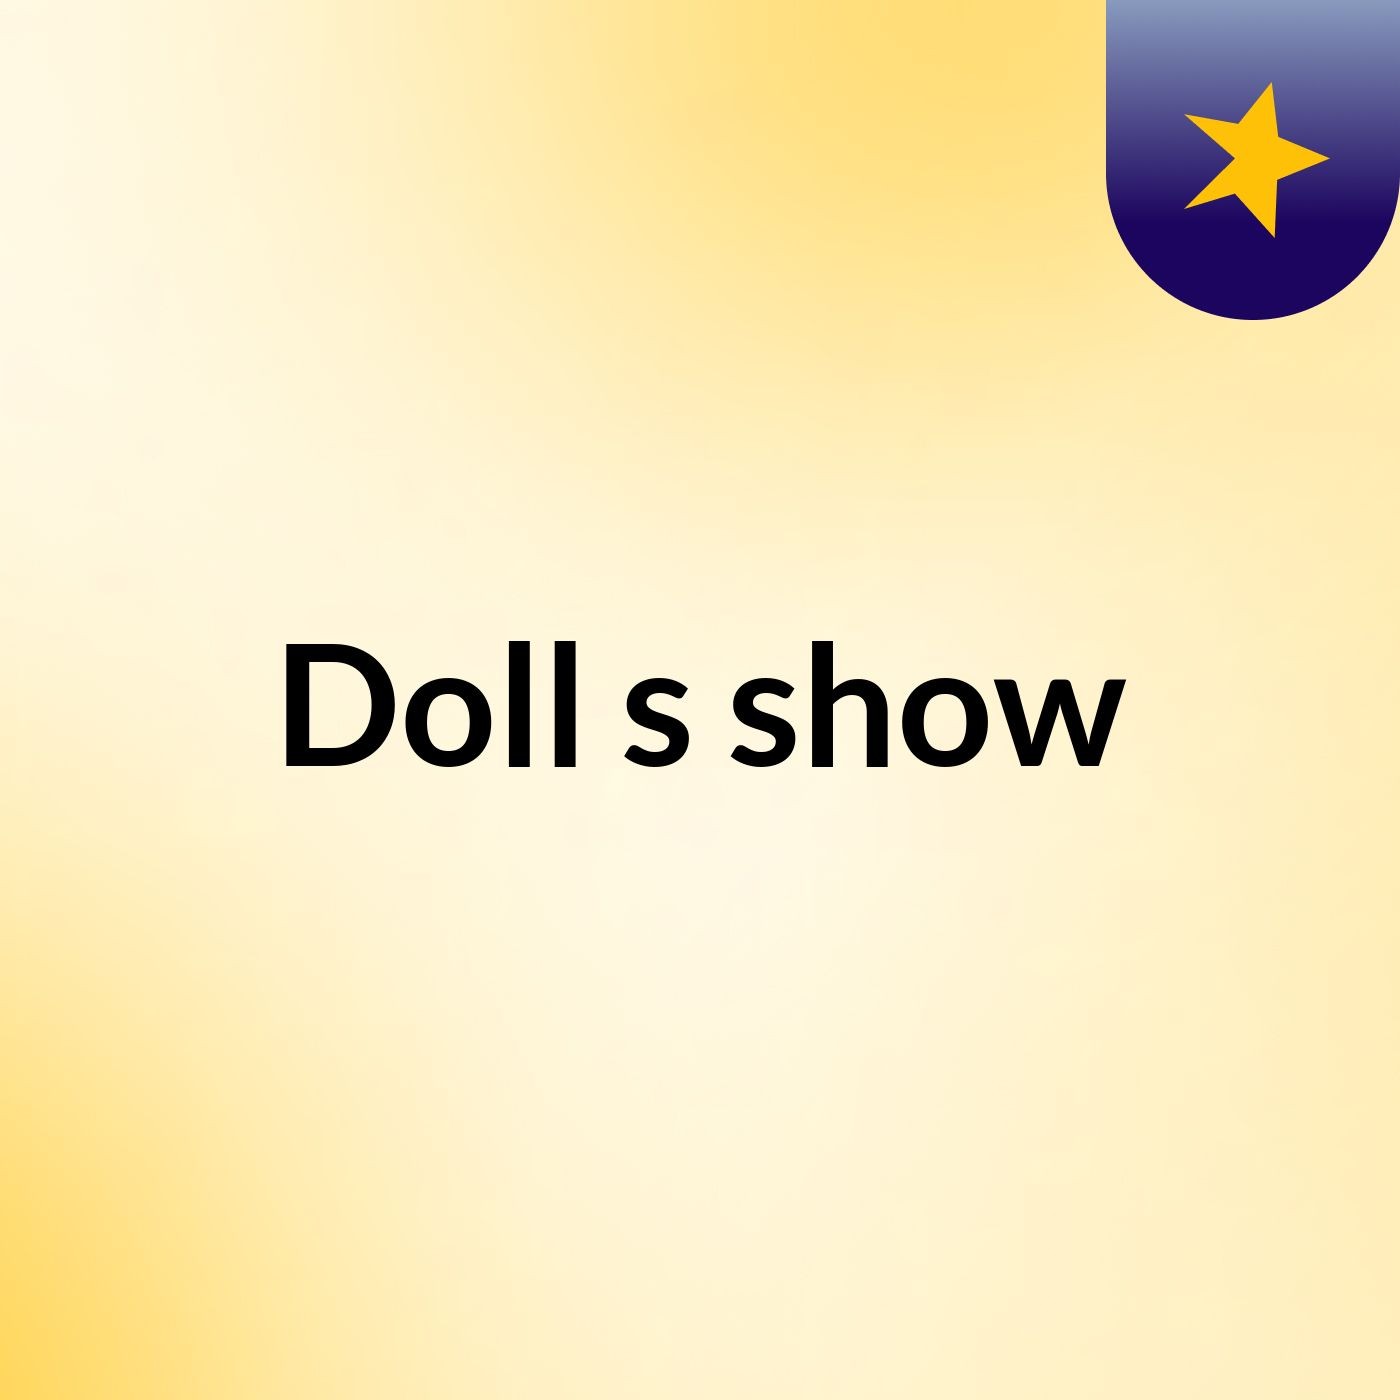 Doll's show